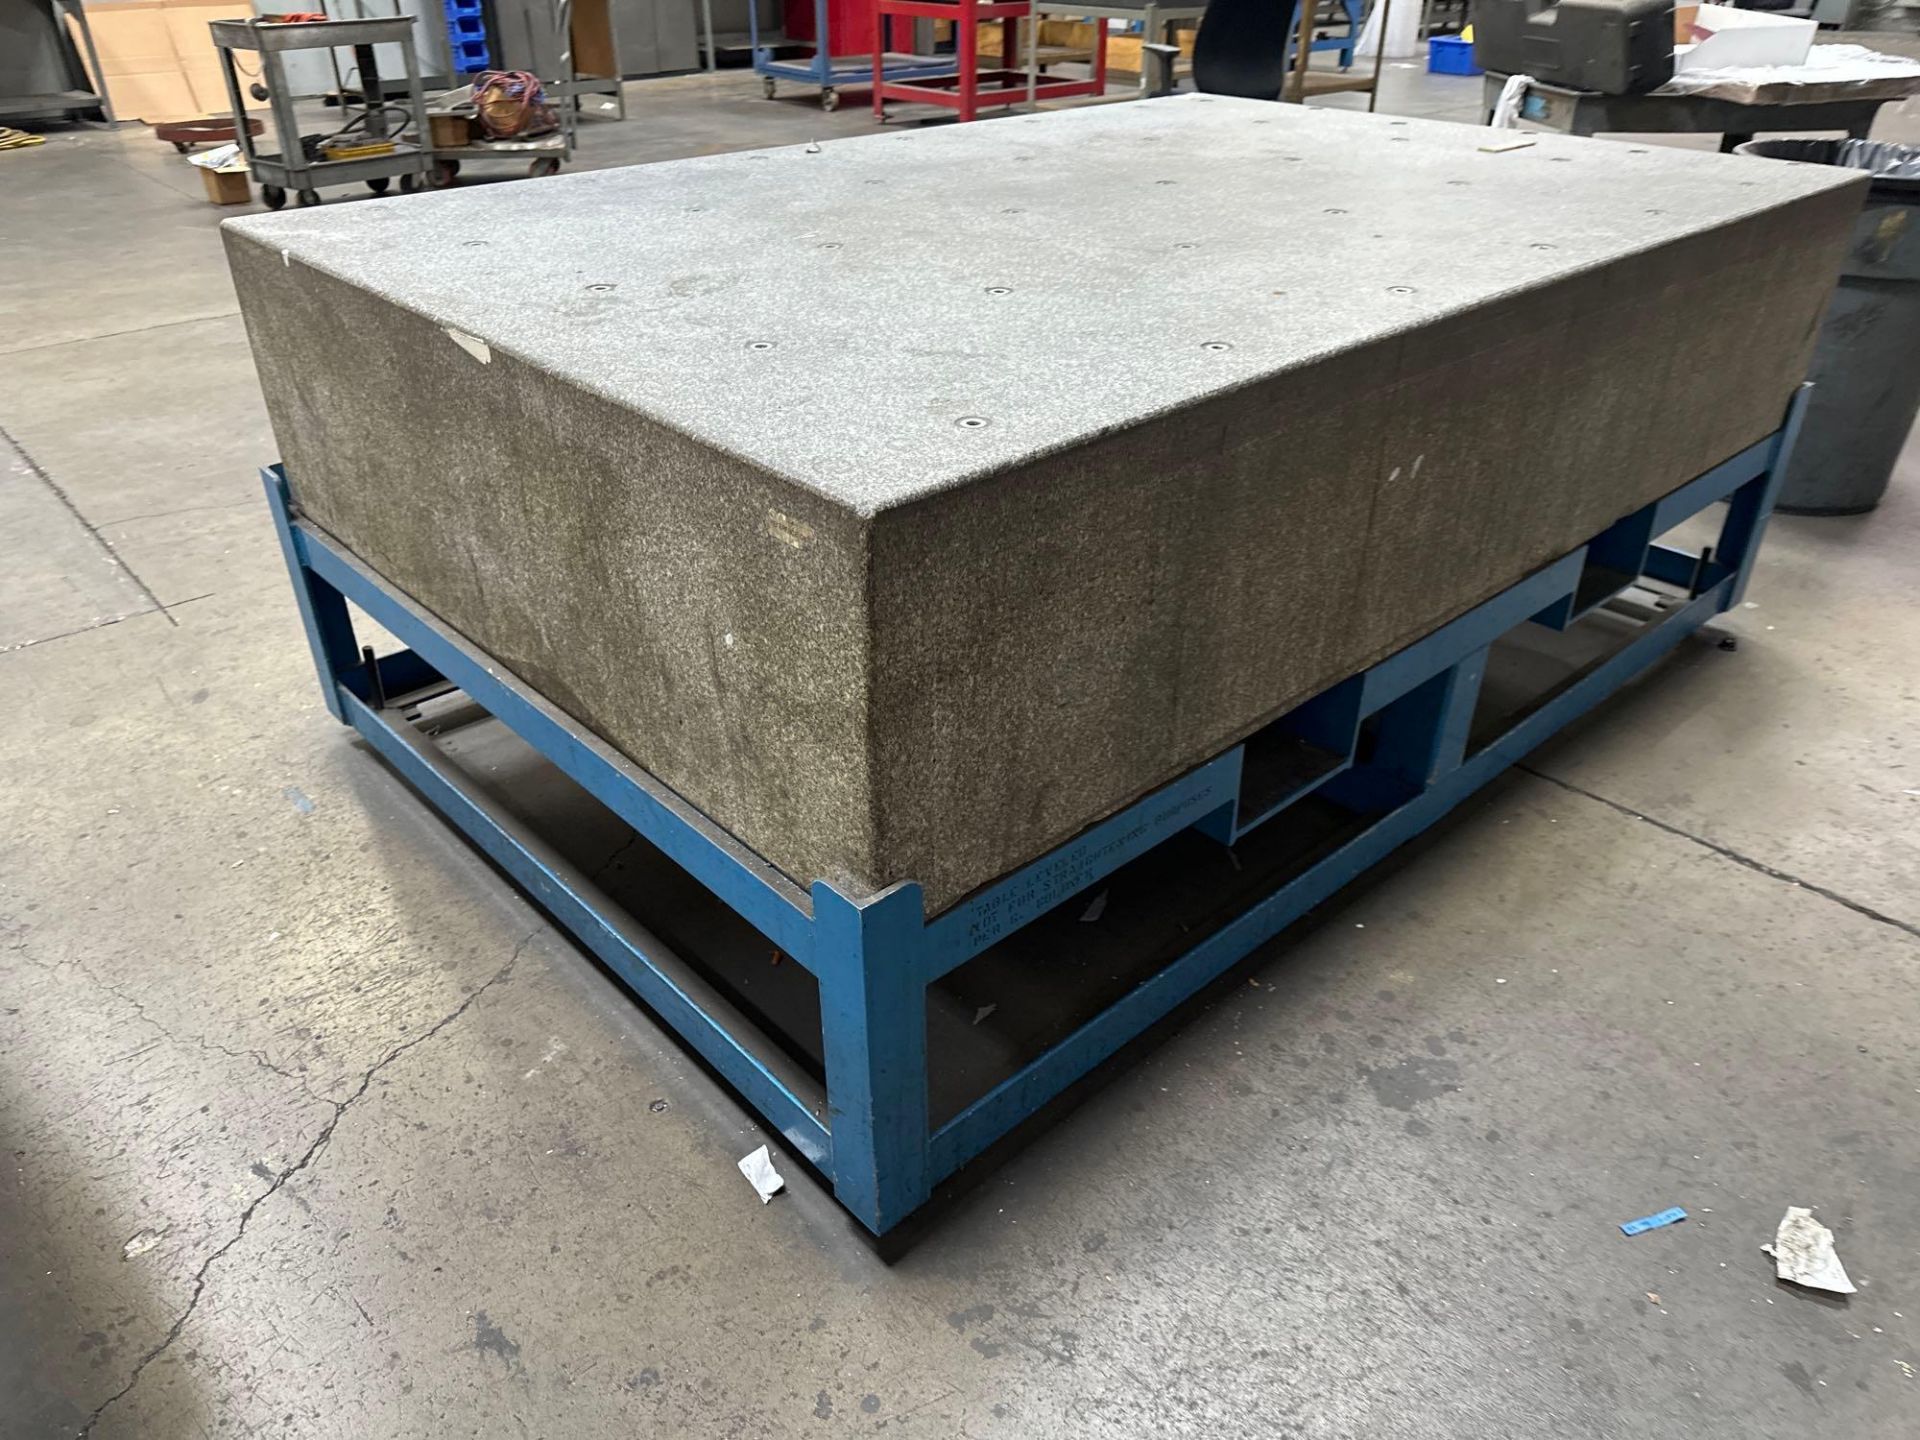 18” x 59” x 90” Granite Surface Plate w/ Steel Stand - Image 3 of 6